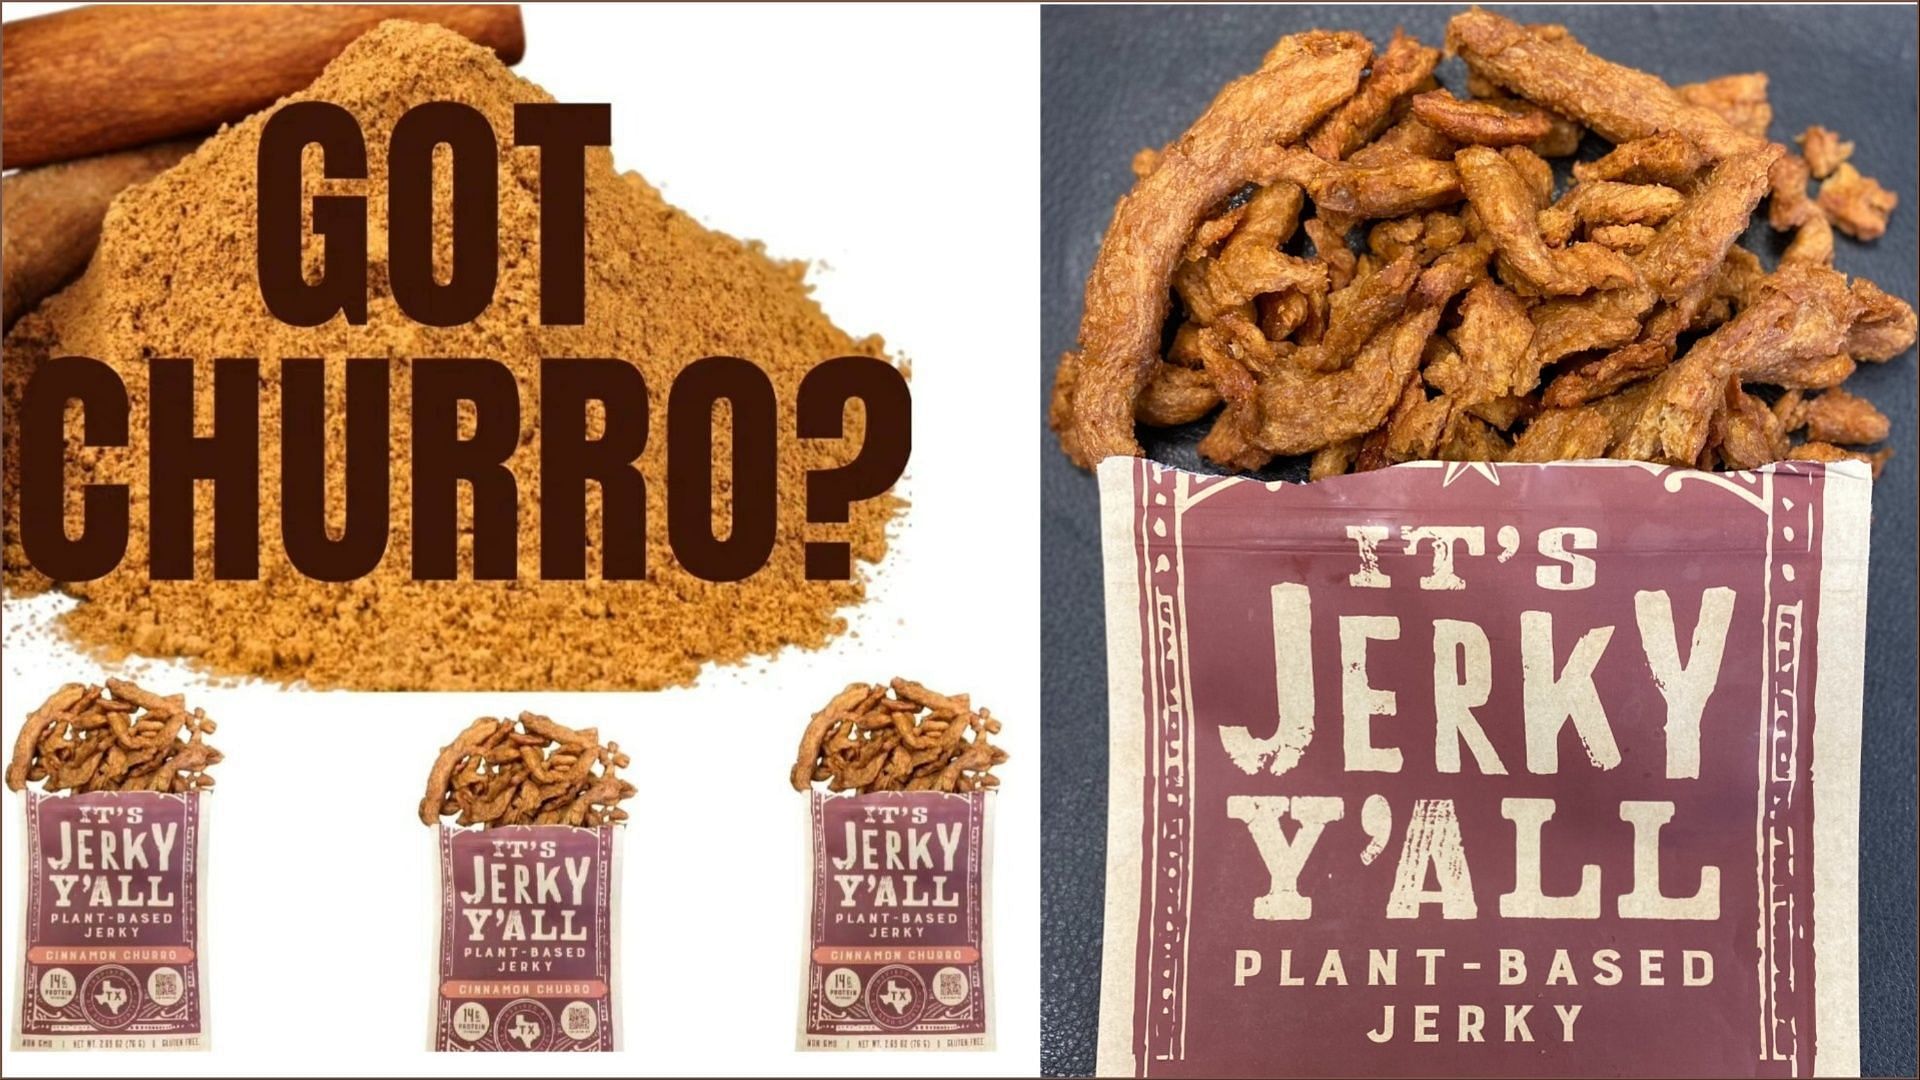 The new Cinnamon Churro Jerky features Cinnamon flavors (Image via All Y&#039;alls Foods)